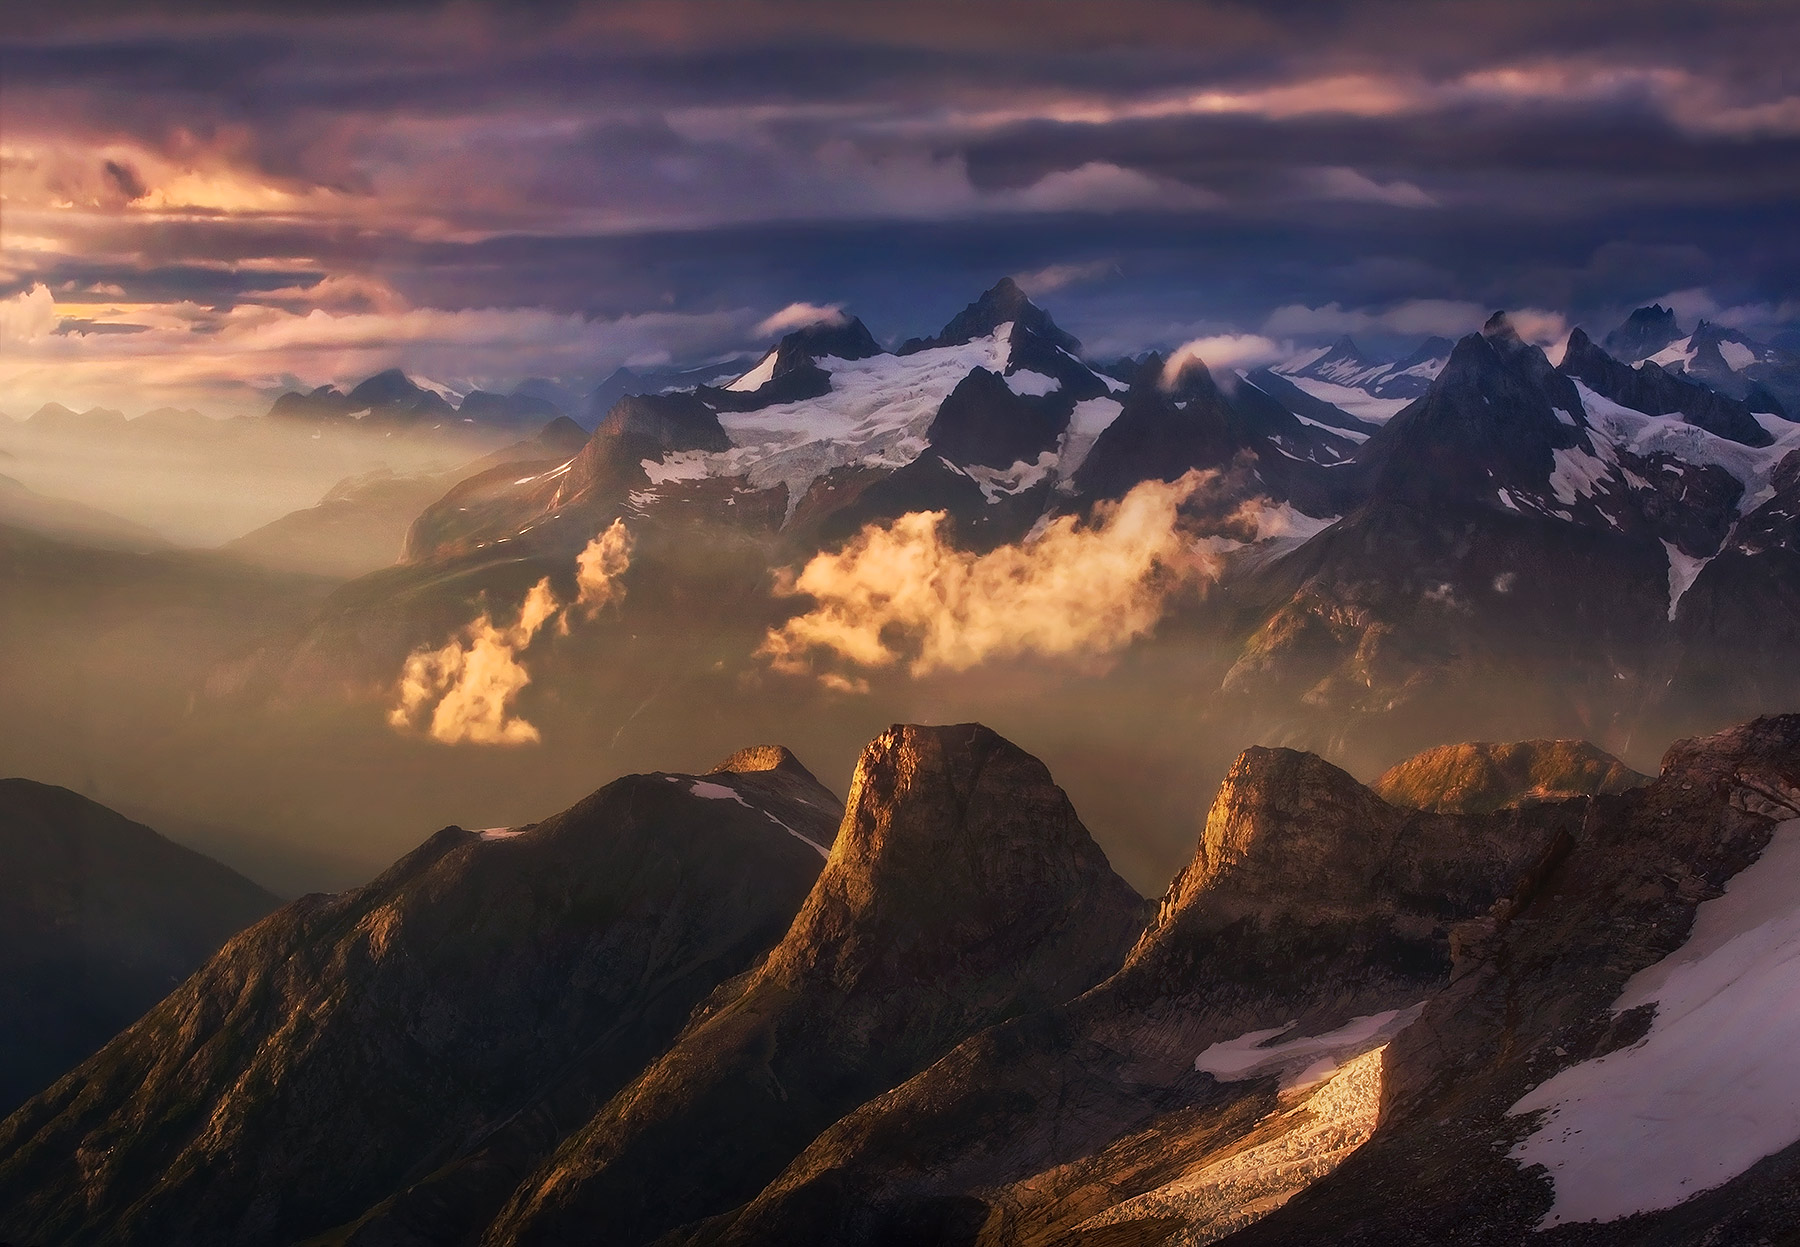 Evening light catches the misty air and peaks high in the Coastal Mountains in Alaska.